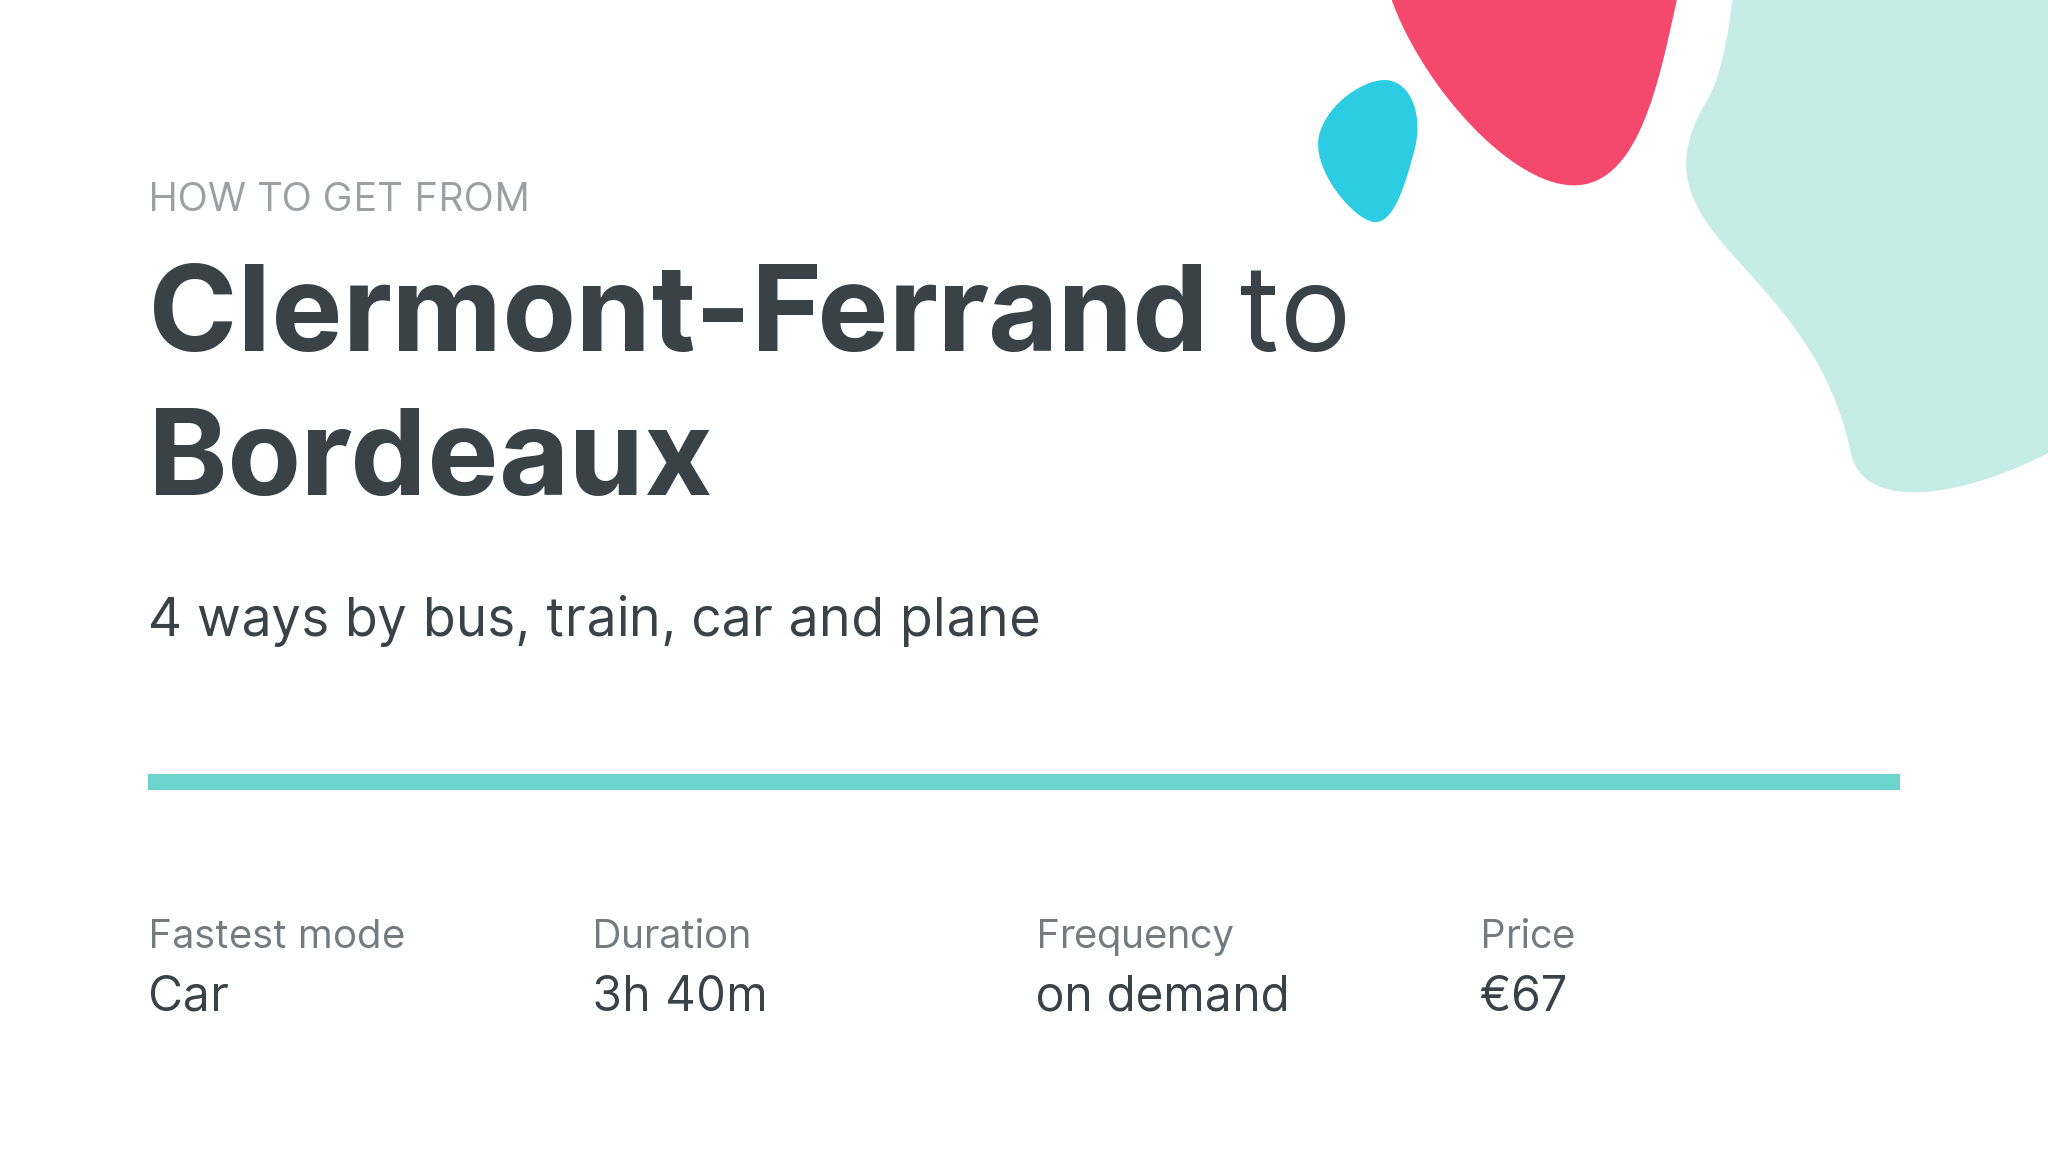 How do I get from Clermont-Ferrand to Bordeaux